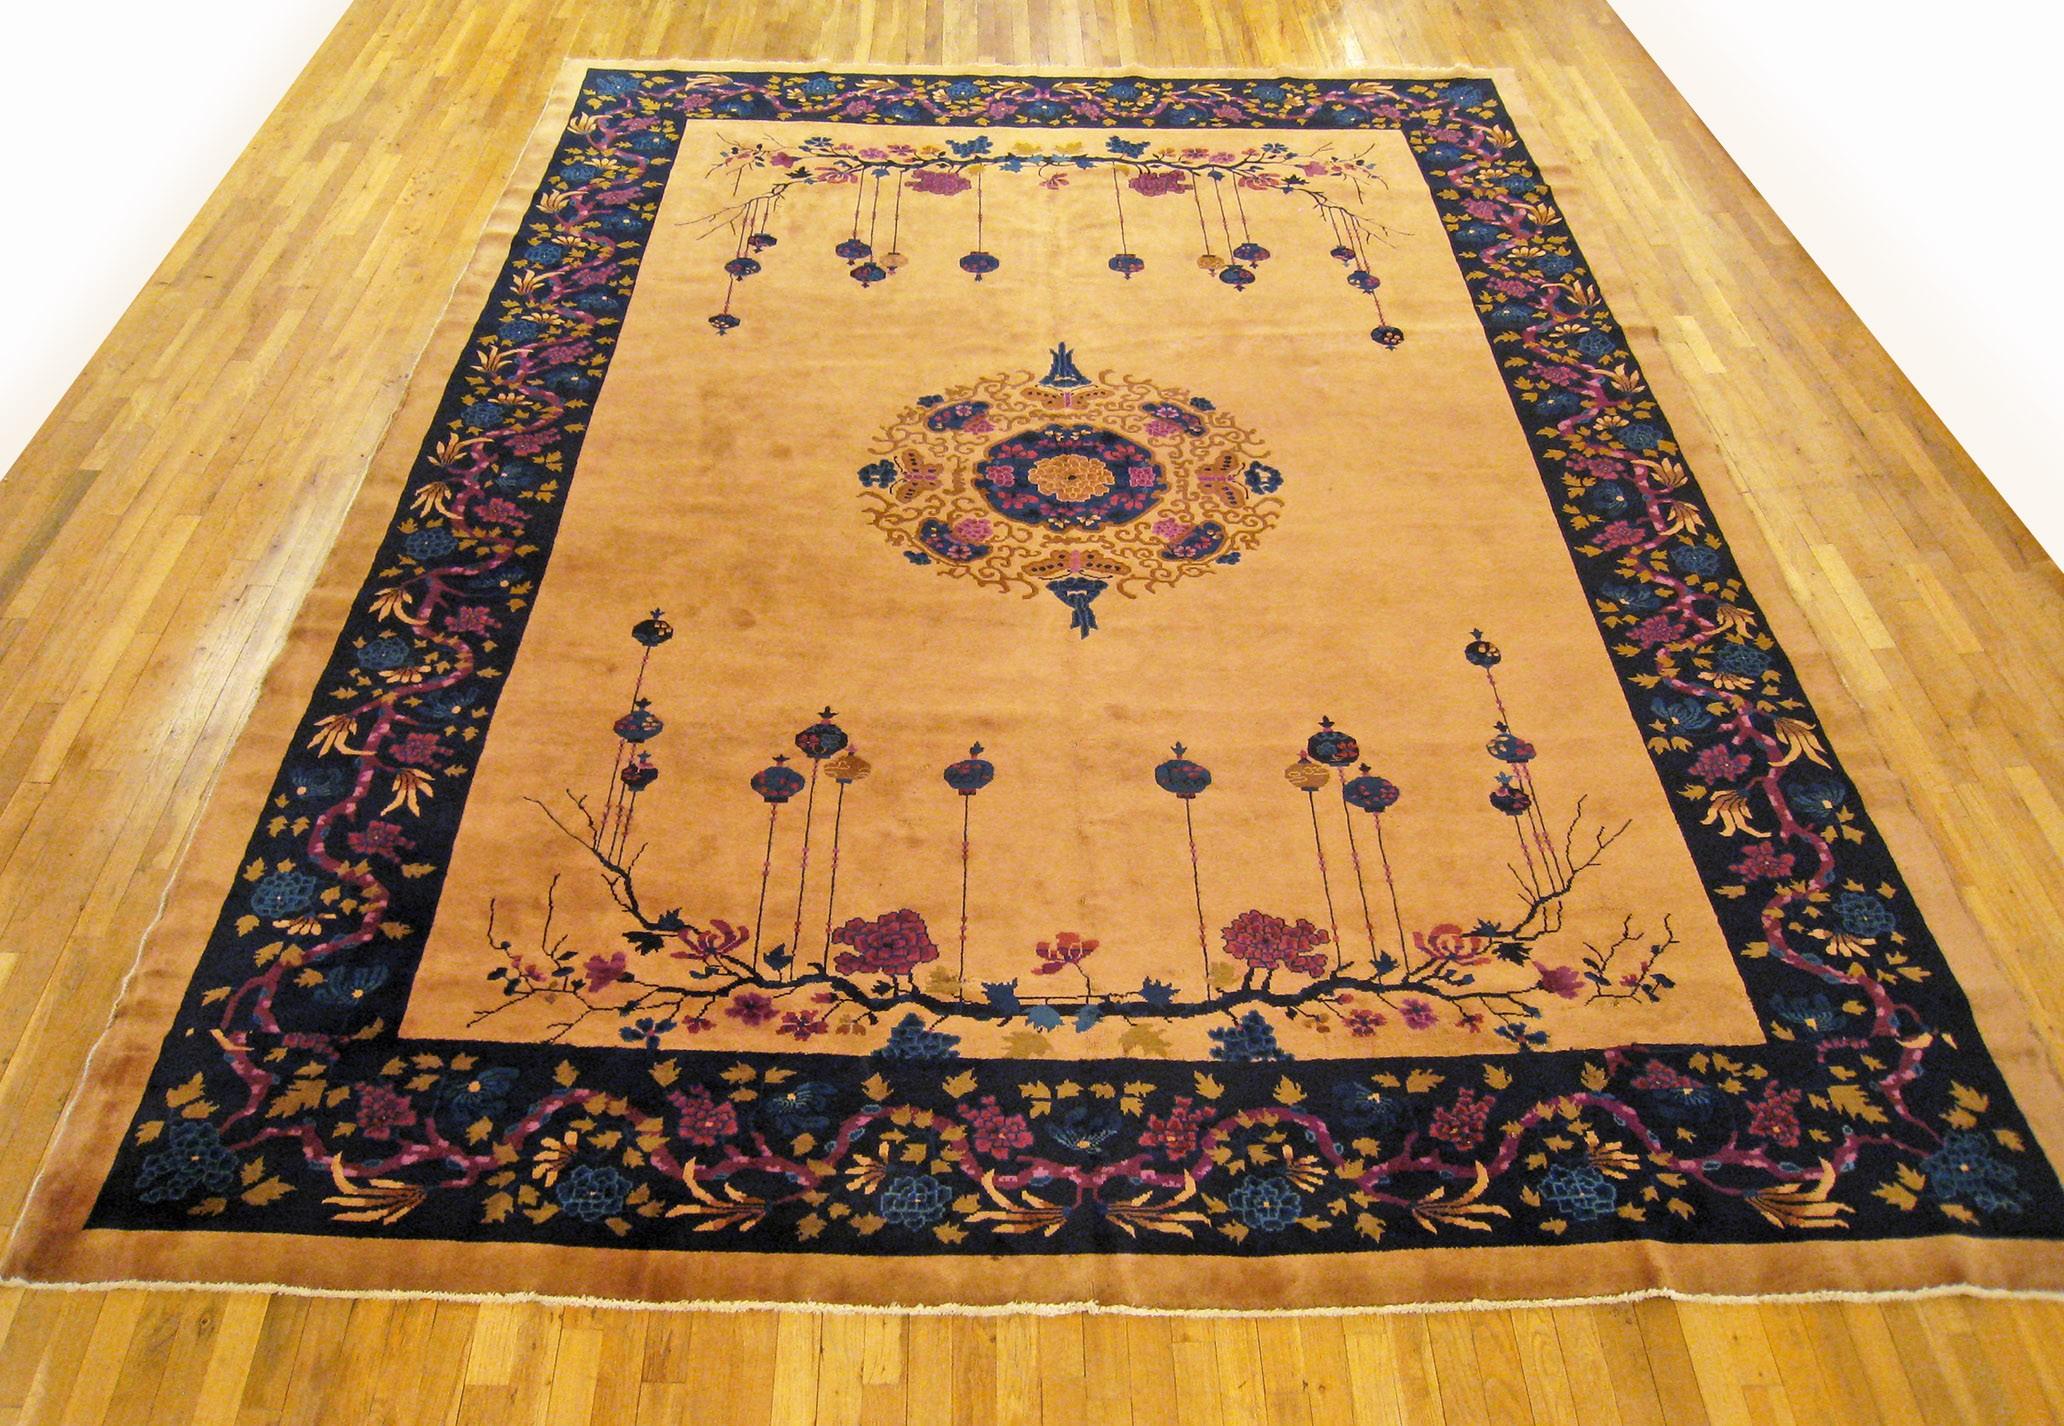 Antique Chinese rug, room size, circa 1920.

A one-of-a-kind antique Chinese oriental carpet, hand-knotted with medium thickness wool pile. This beautiful hand-knotted rug features chinese motifs and a central medallion on an open gold field, with a